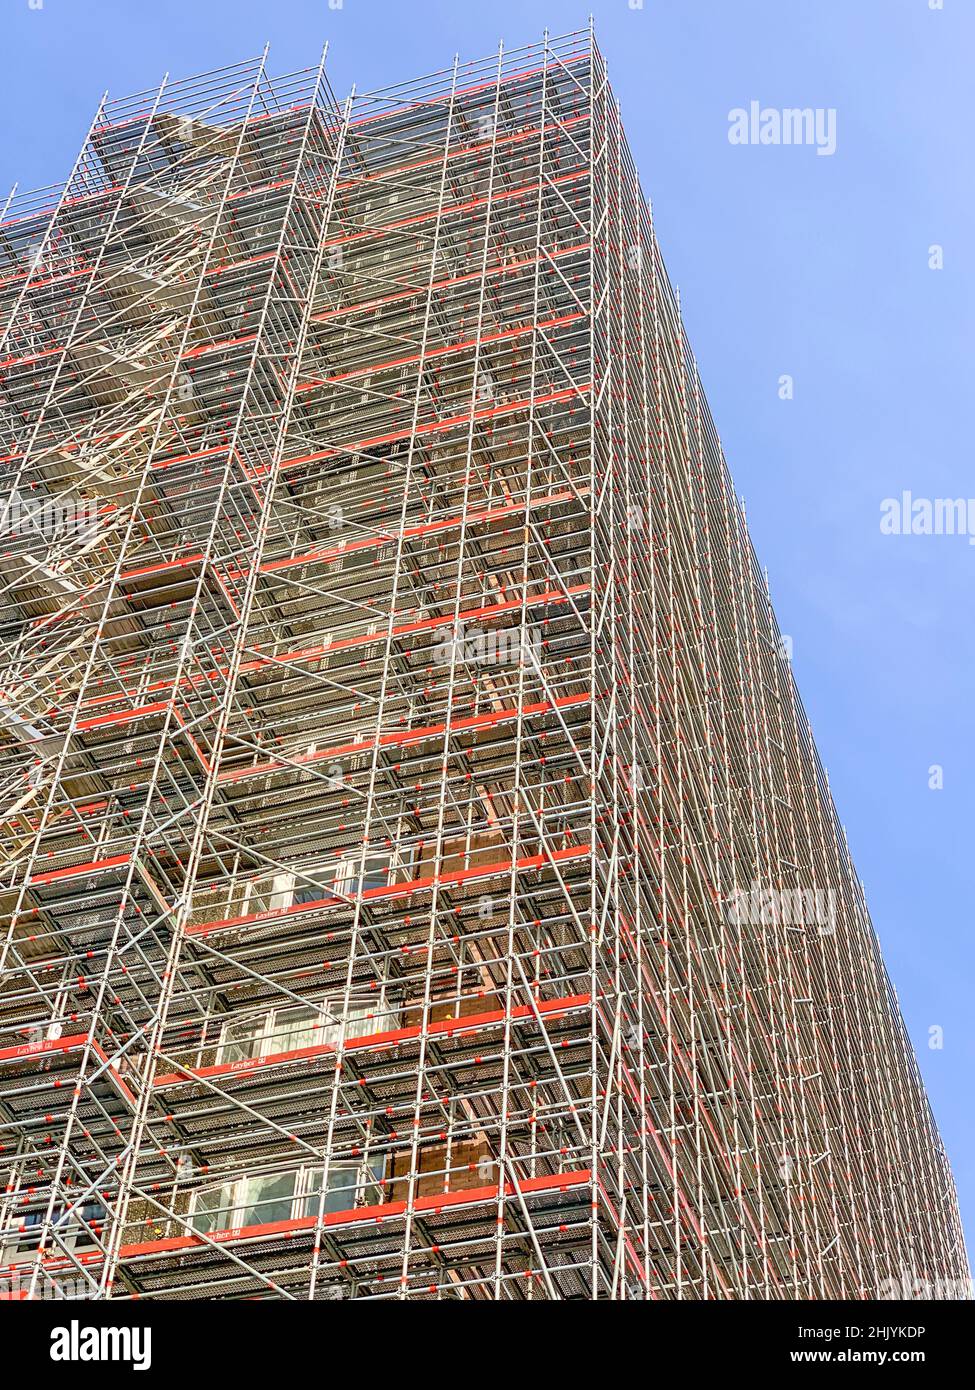 Tower Court, a High-rise Block of Flats in Westcliff-on-Sea Completely Clad in Scaffolding Stock Photo